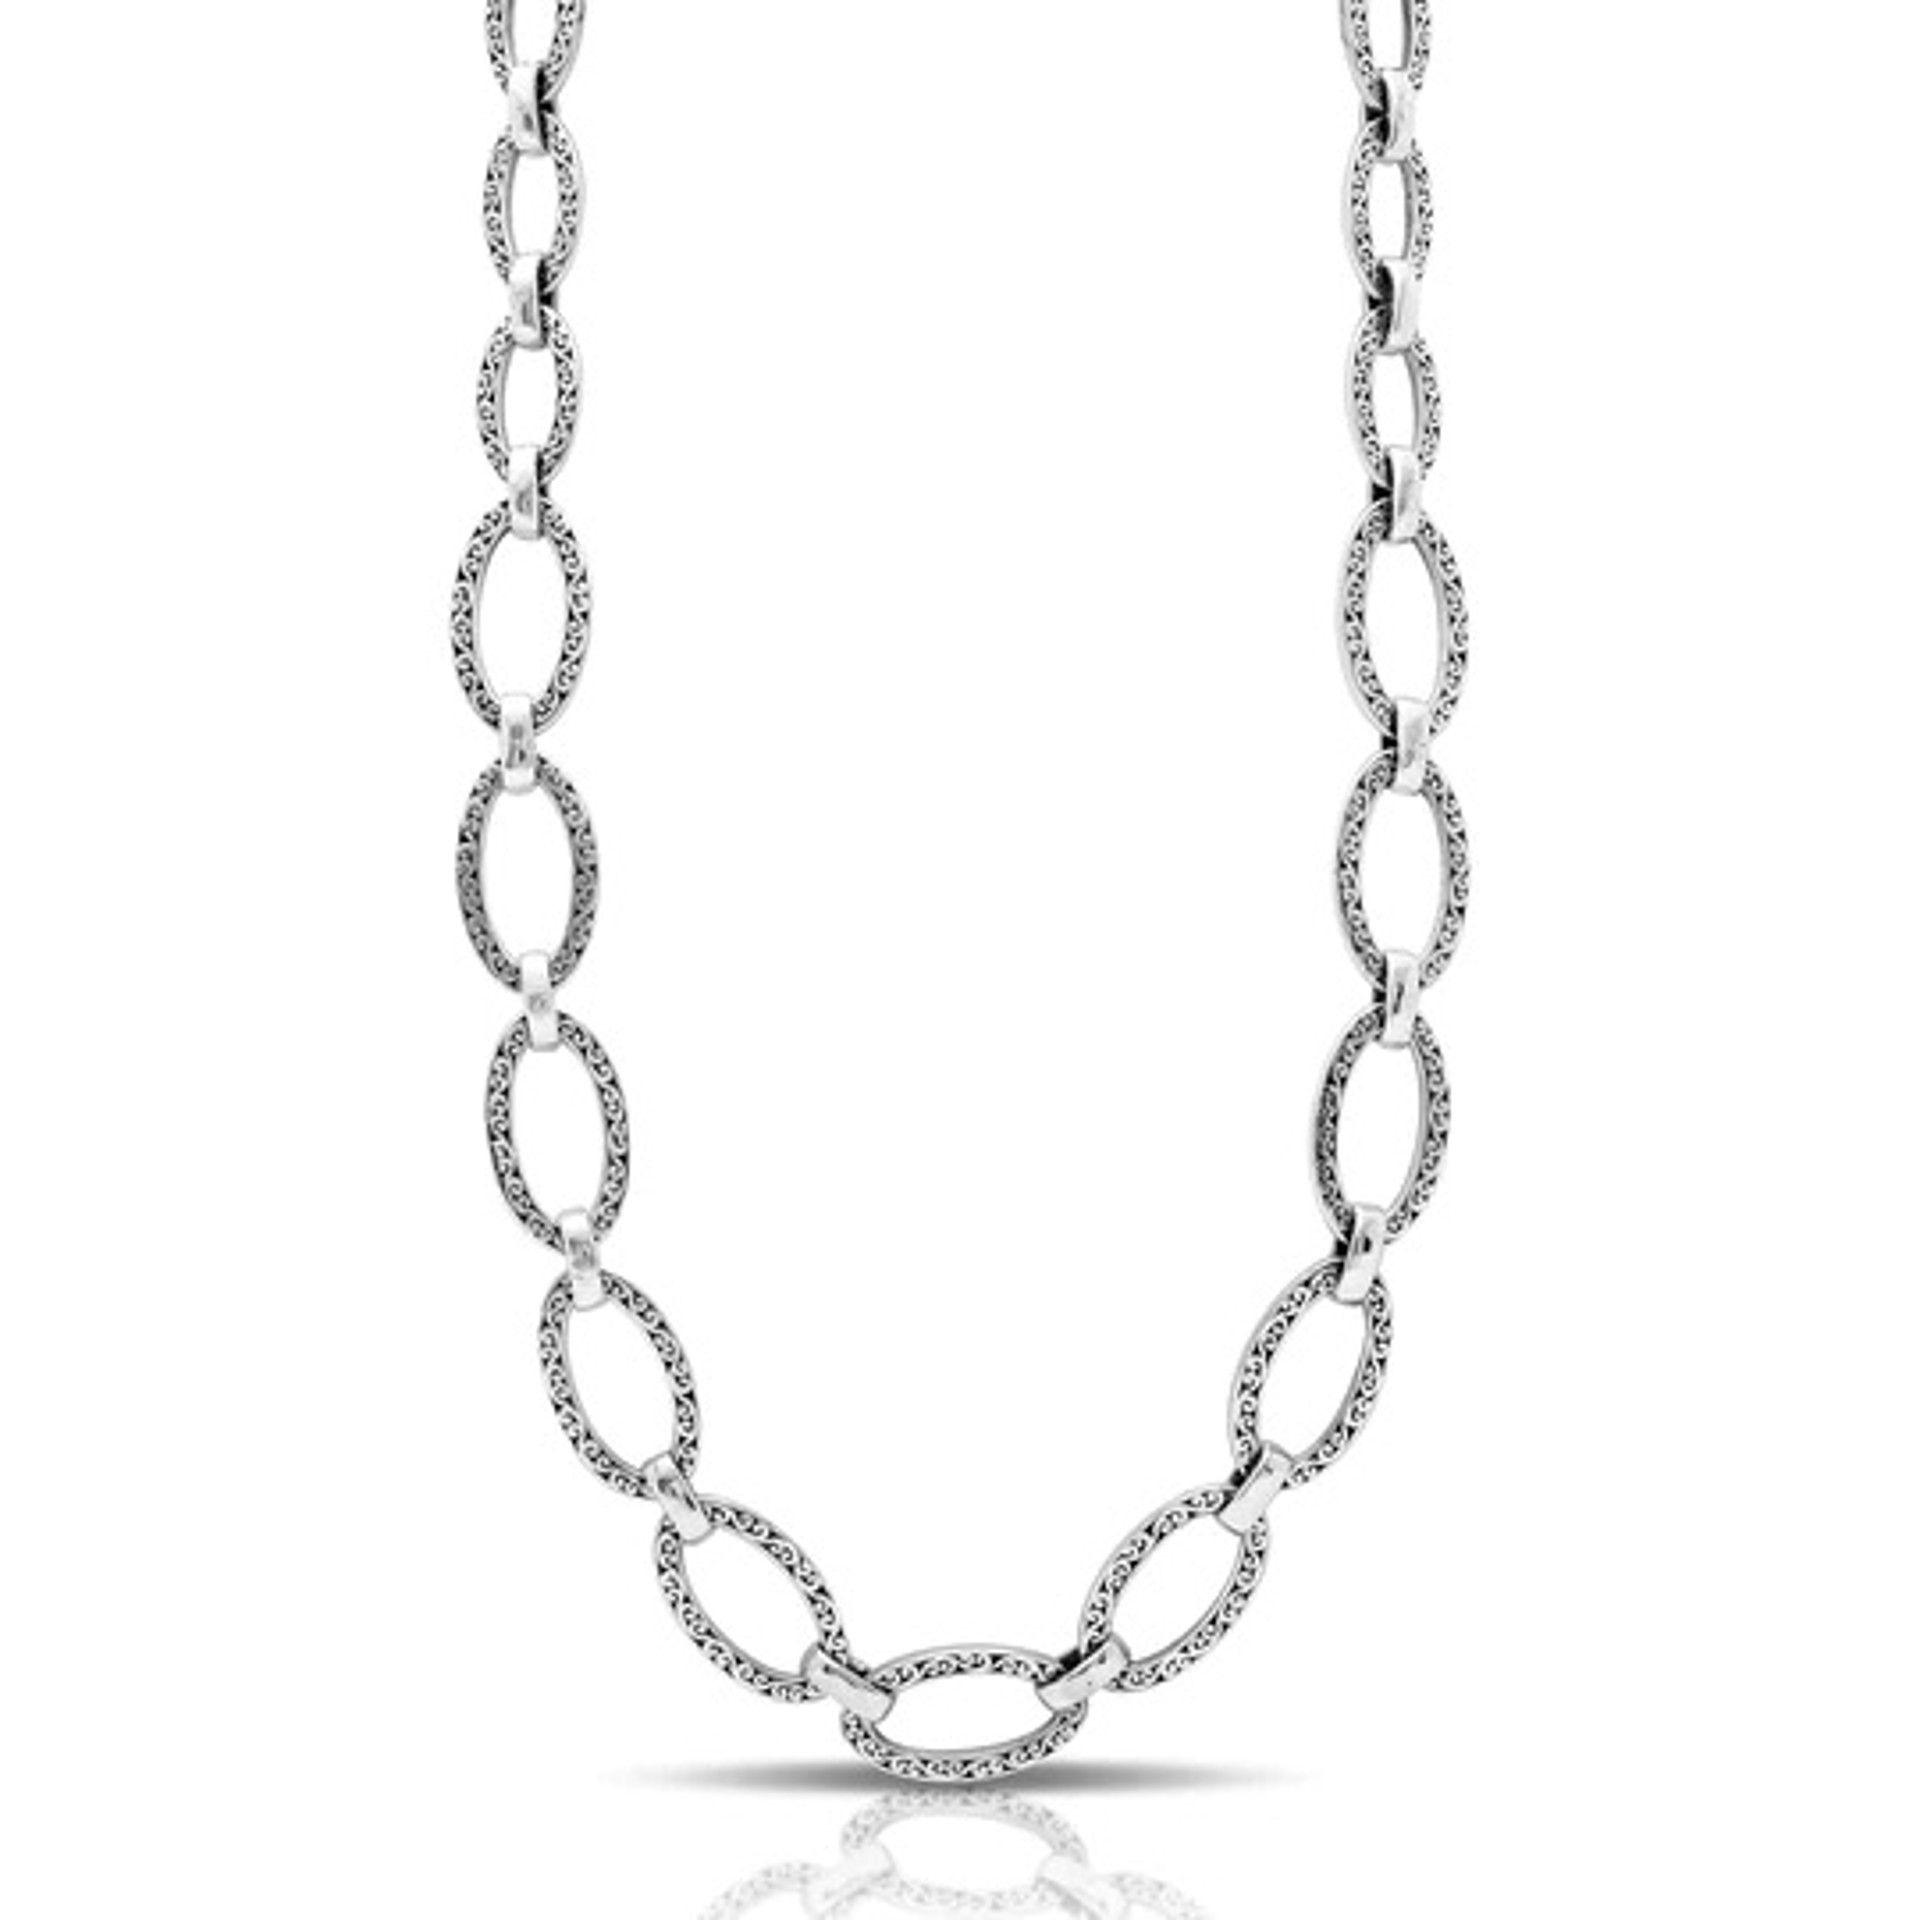 LH Scroll Square Sided Oval Link Tapered 18"-21" Necklace by Lois Hill